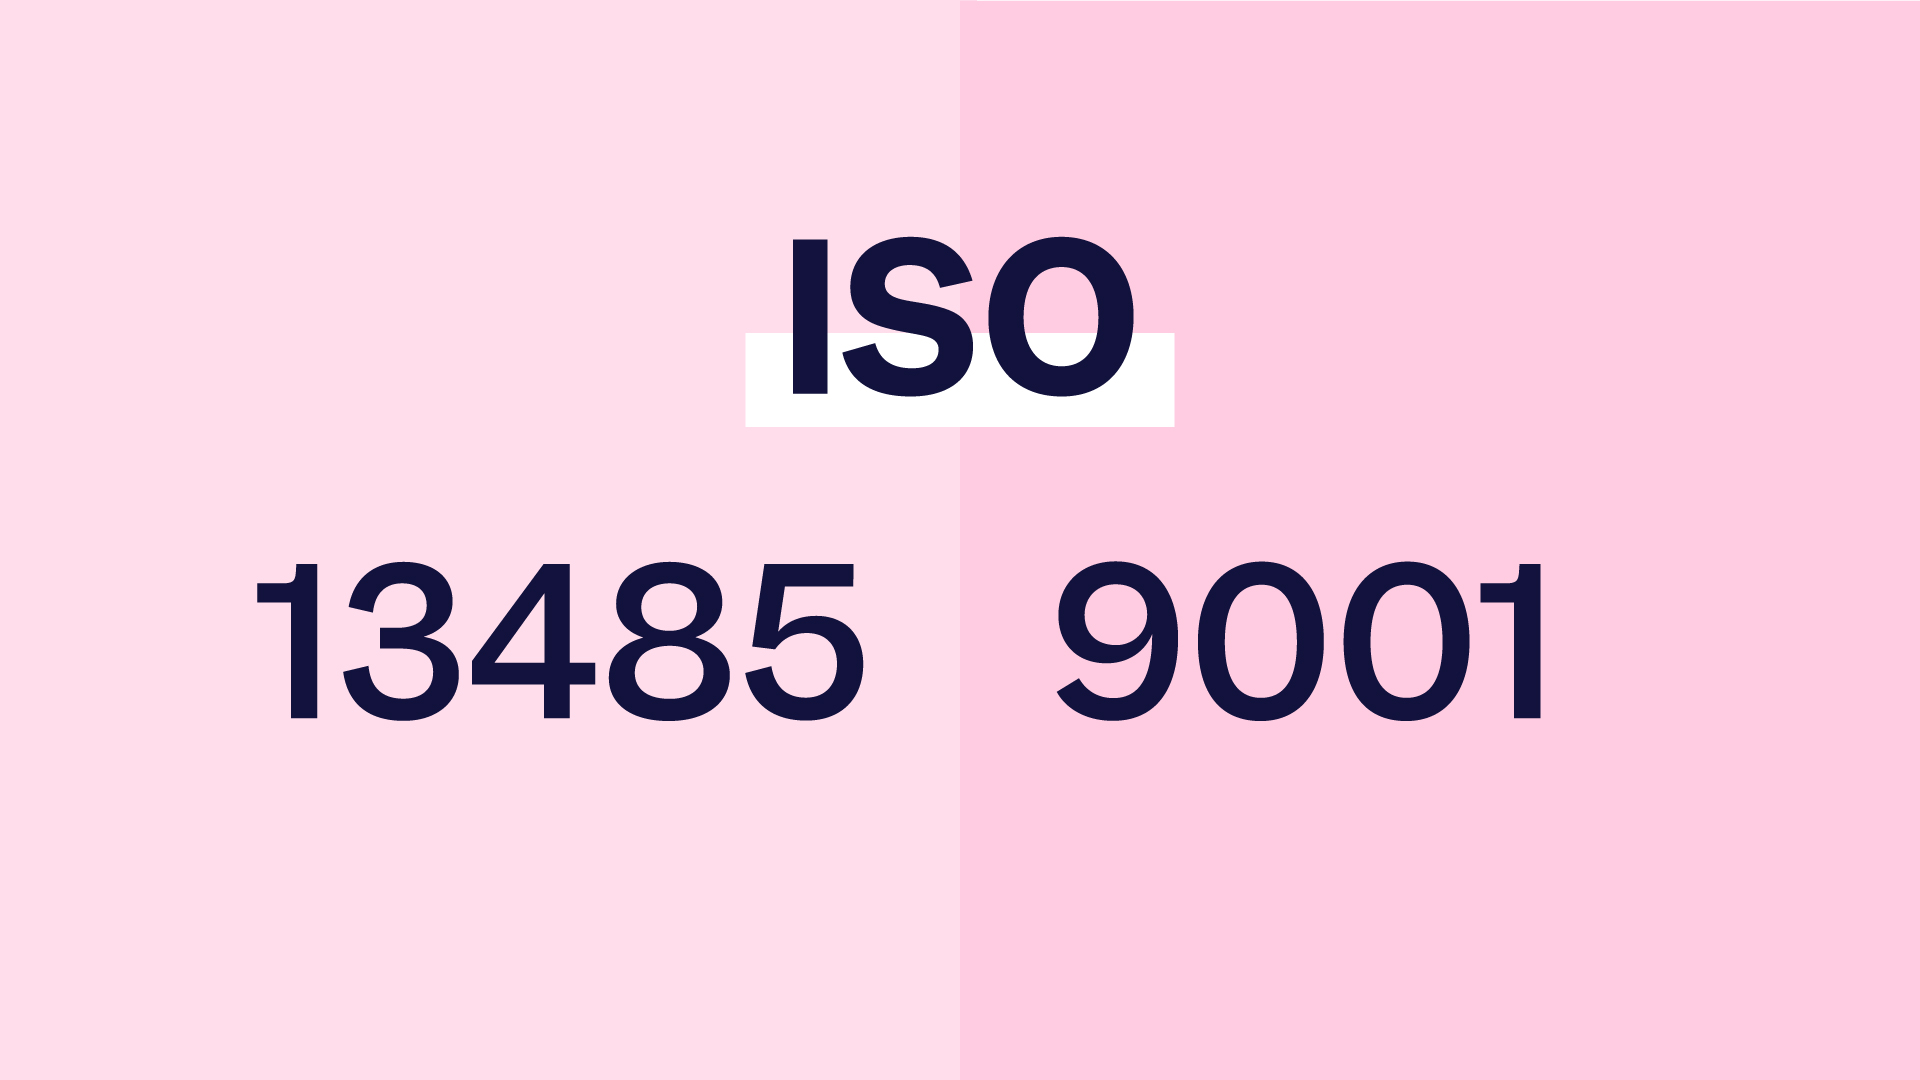 How is ISO 13485 for Medical Devices different from ISO 9001?